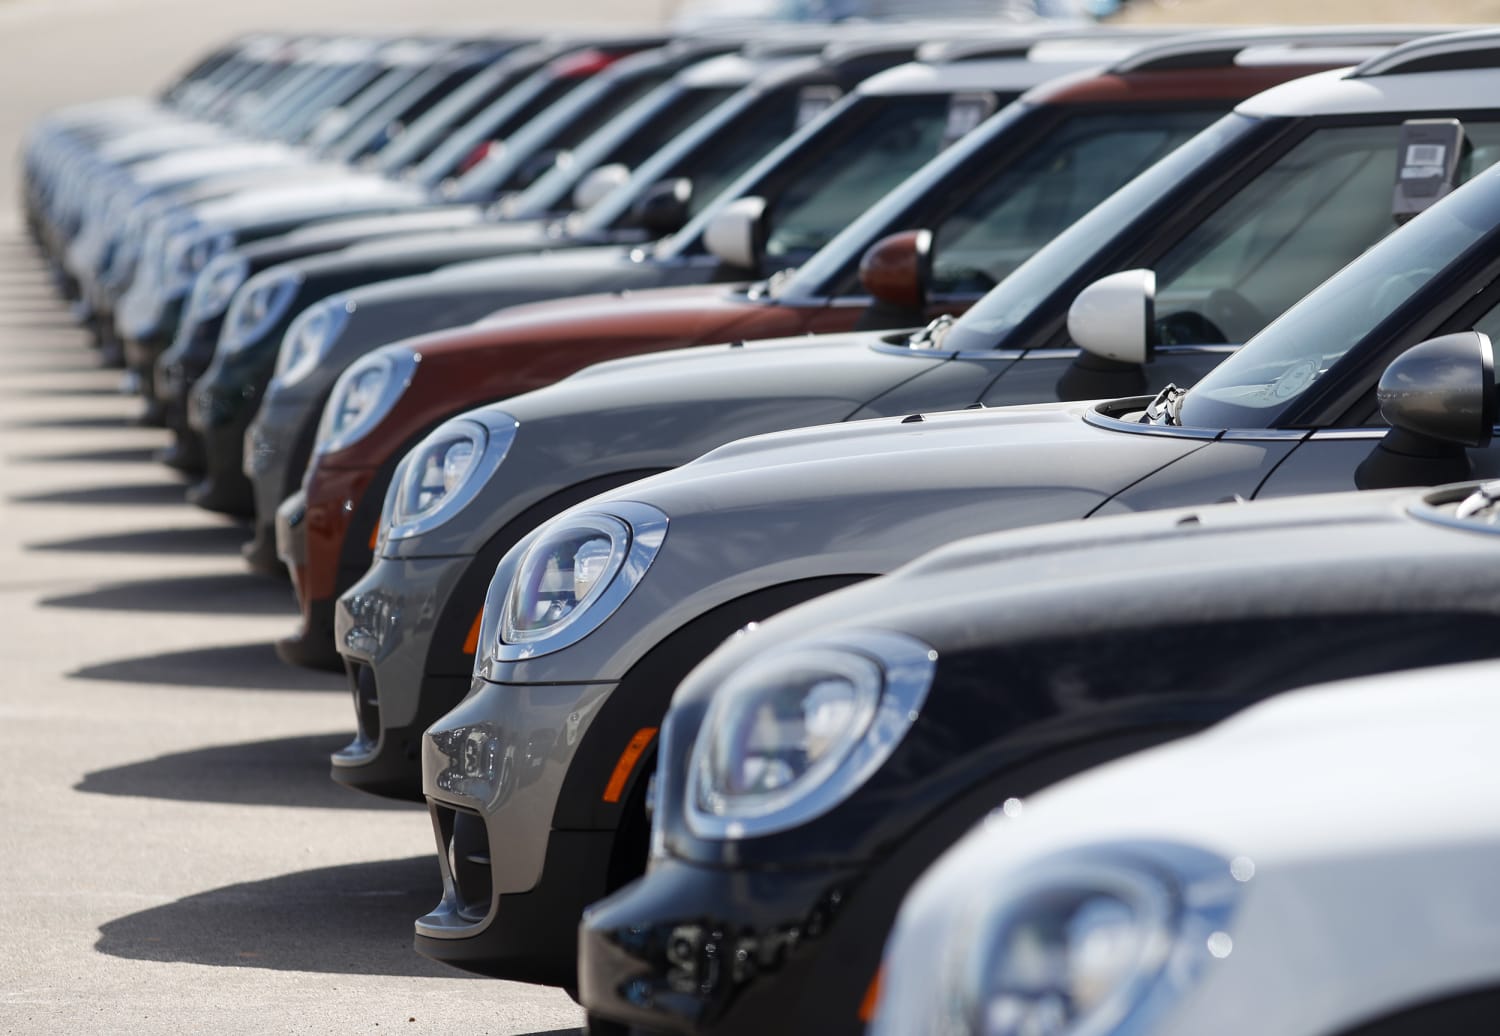 Is this the best weekend to buy a new car?